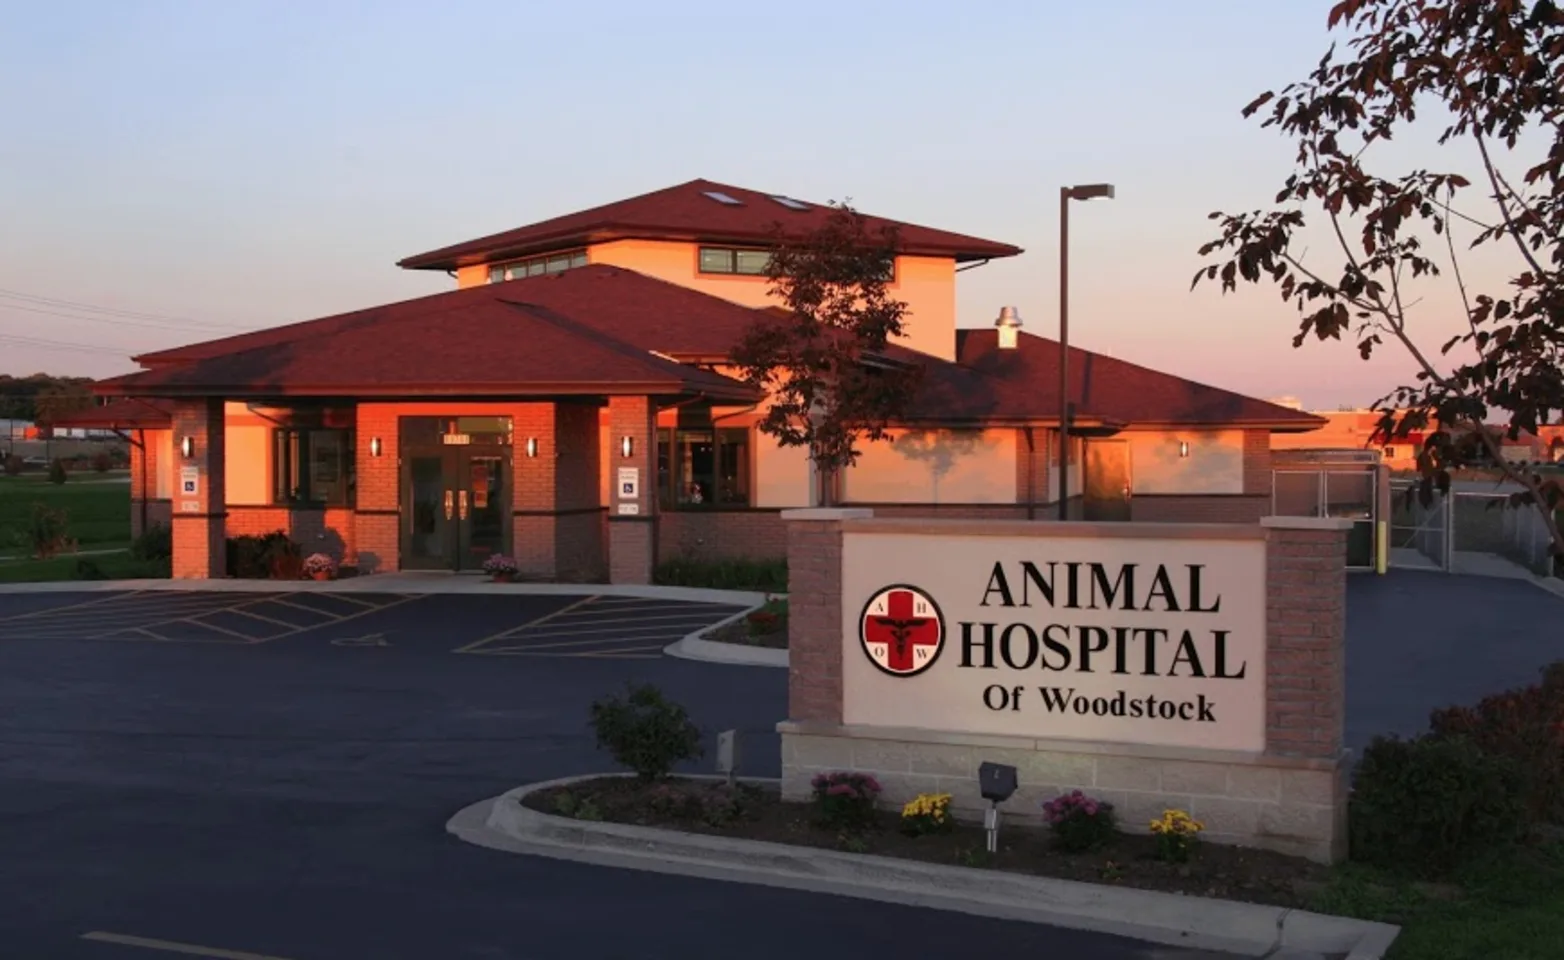 Exterior of Animal of Hospital of Woodstock